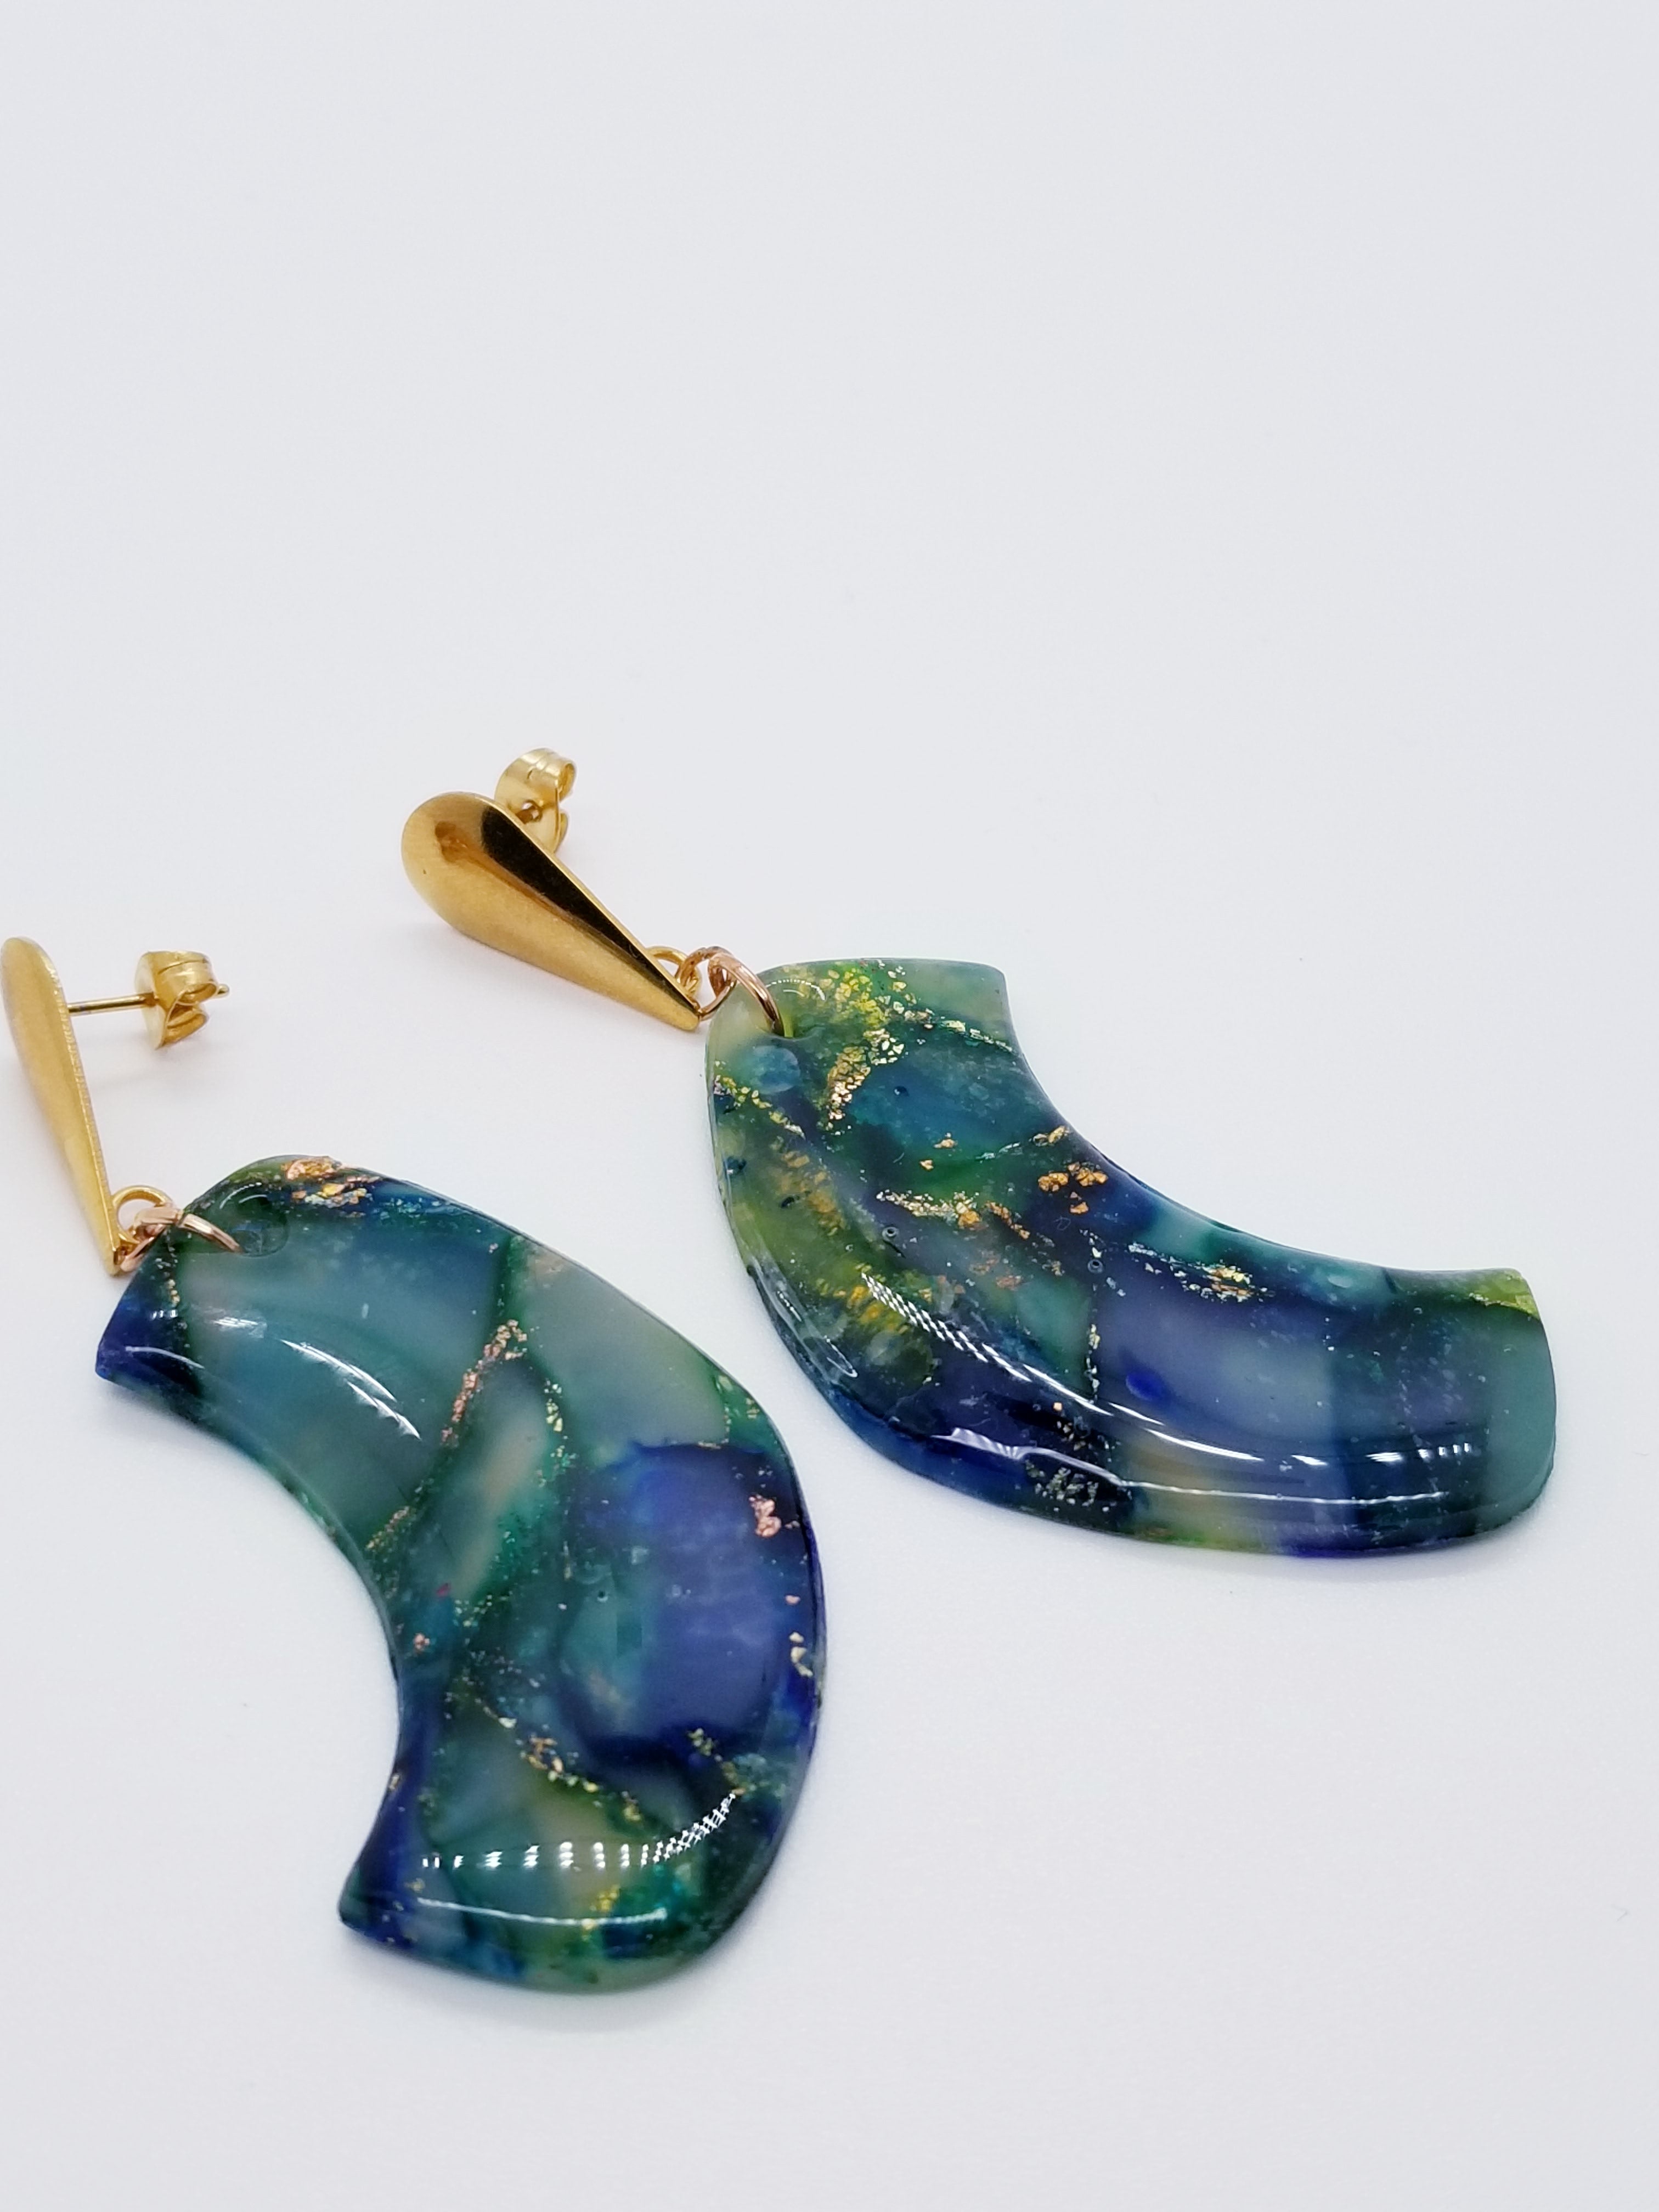 Length: 3 inches | Weight: 0.6 ounces  Designed just for you! The earrings are handmade using green blue swirl gold resin design, gold charm with hypoallergenic posts with back closures.